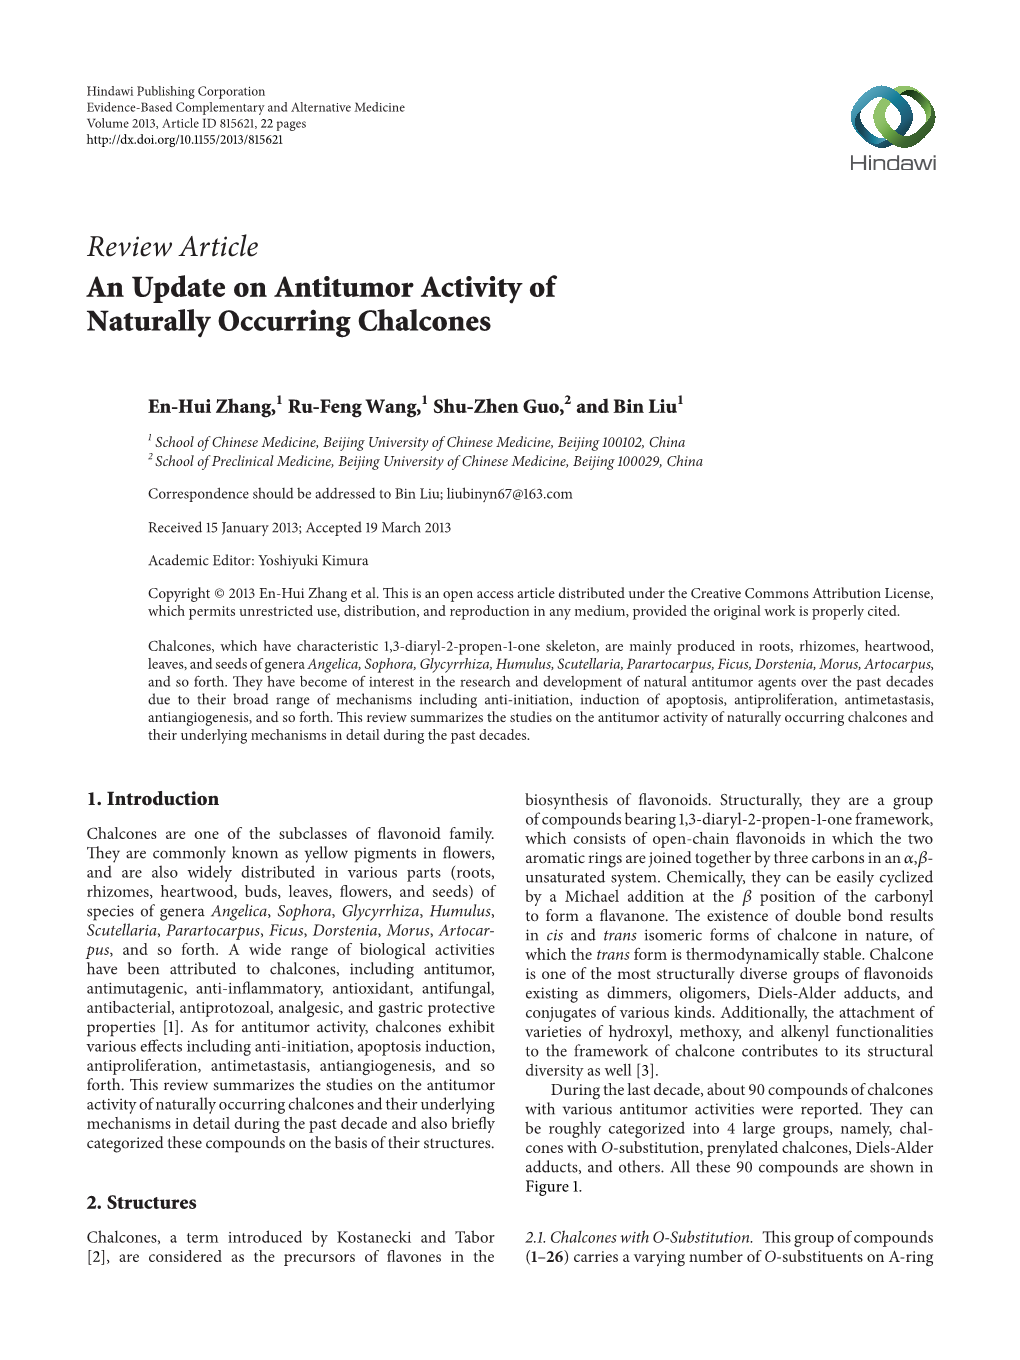 An Update on Antitumor Activity of Naturally Occurring Chalcones